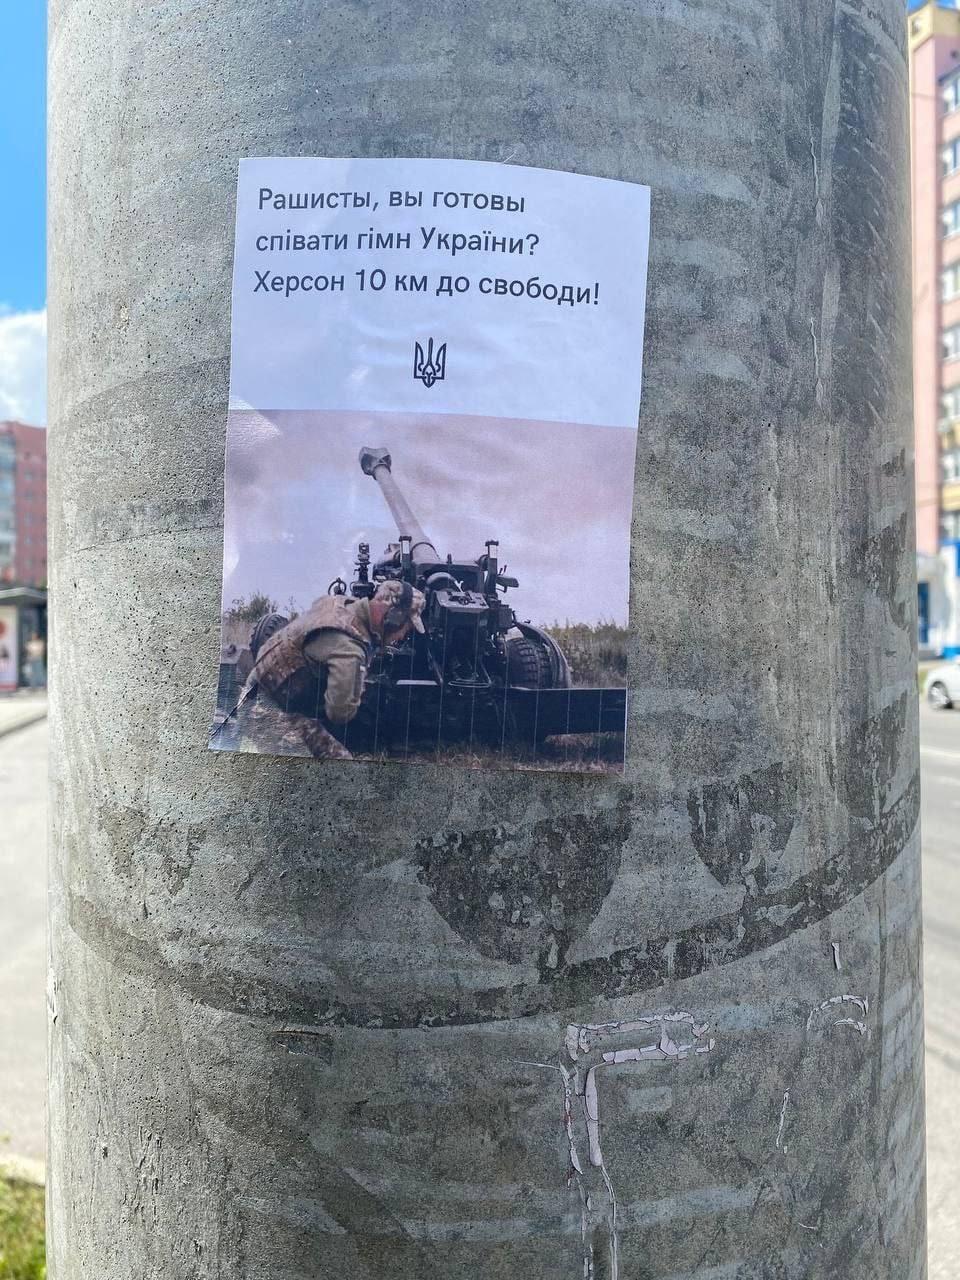 Members of the resistance movement inform Russian troops about the successes of the Ukrainian army in leaflets in Kherson.